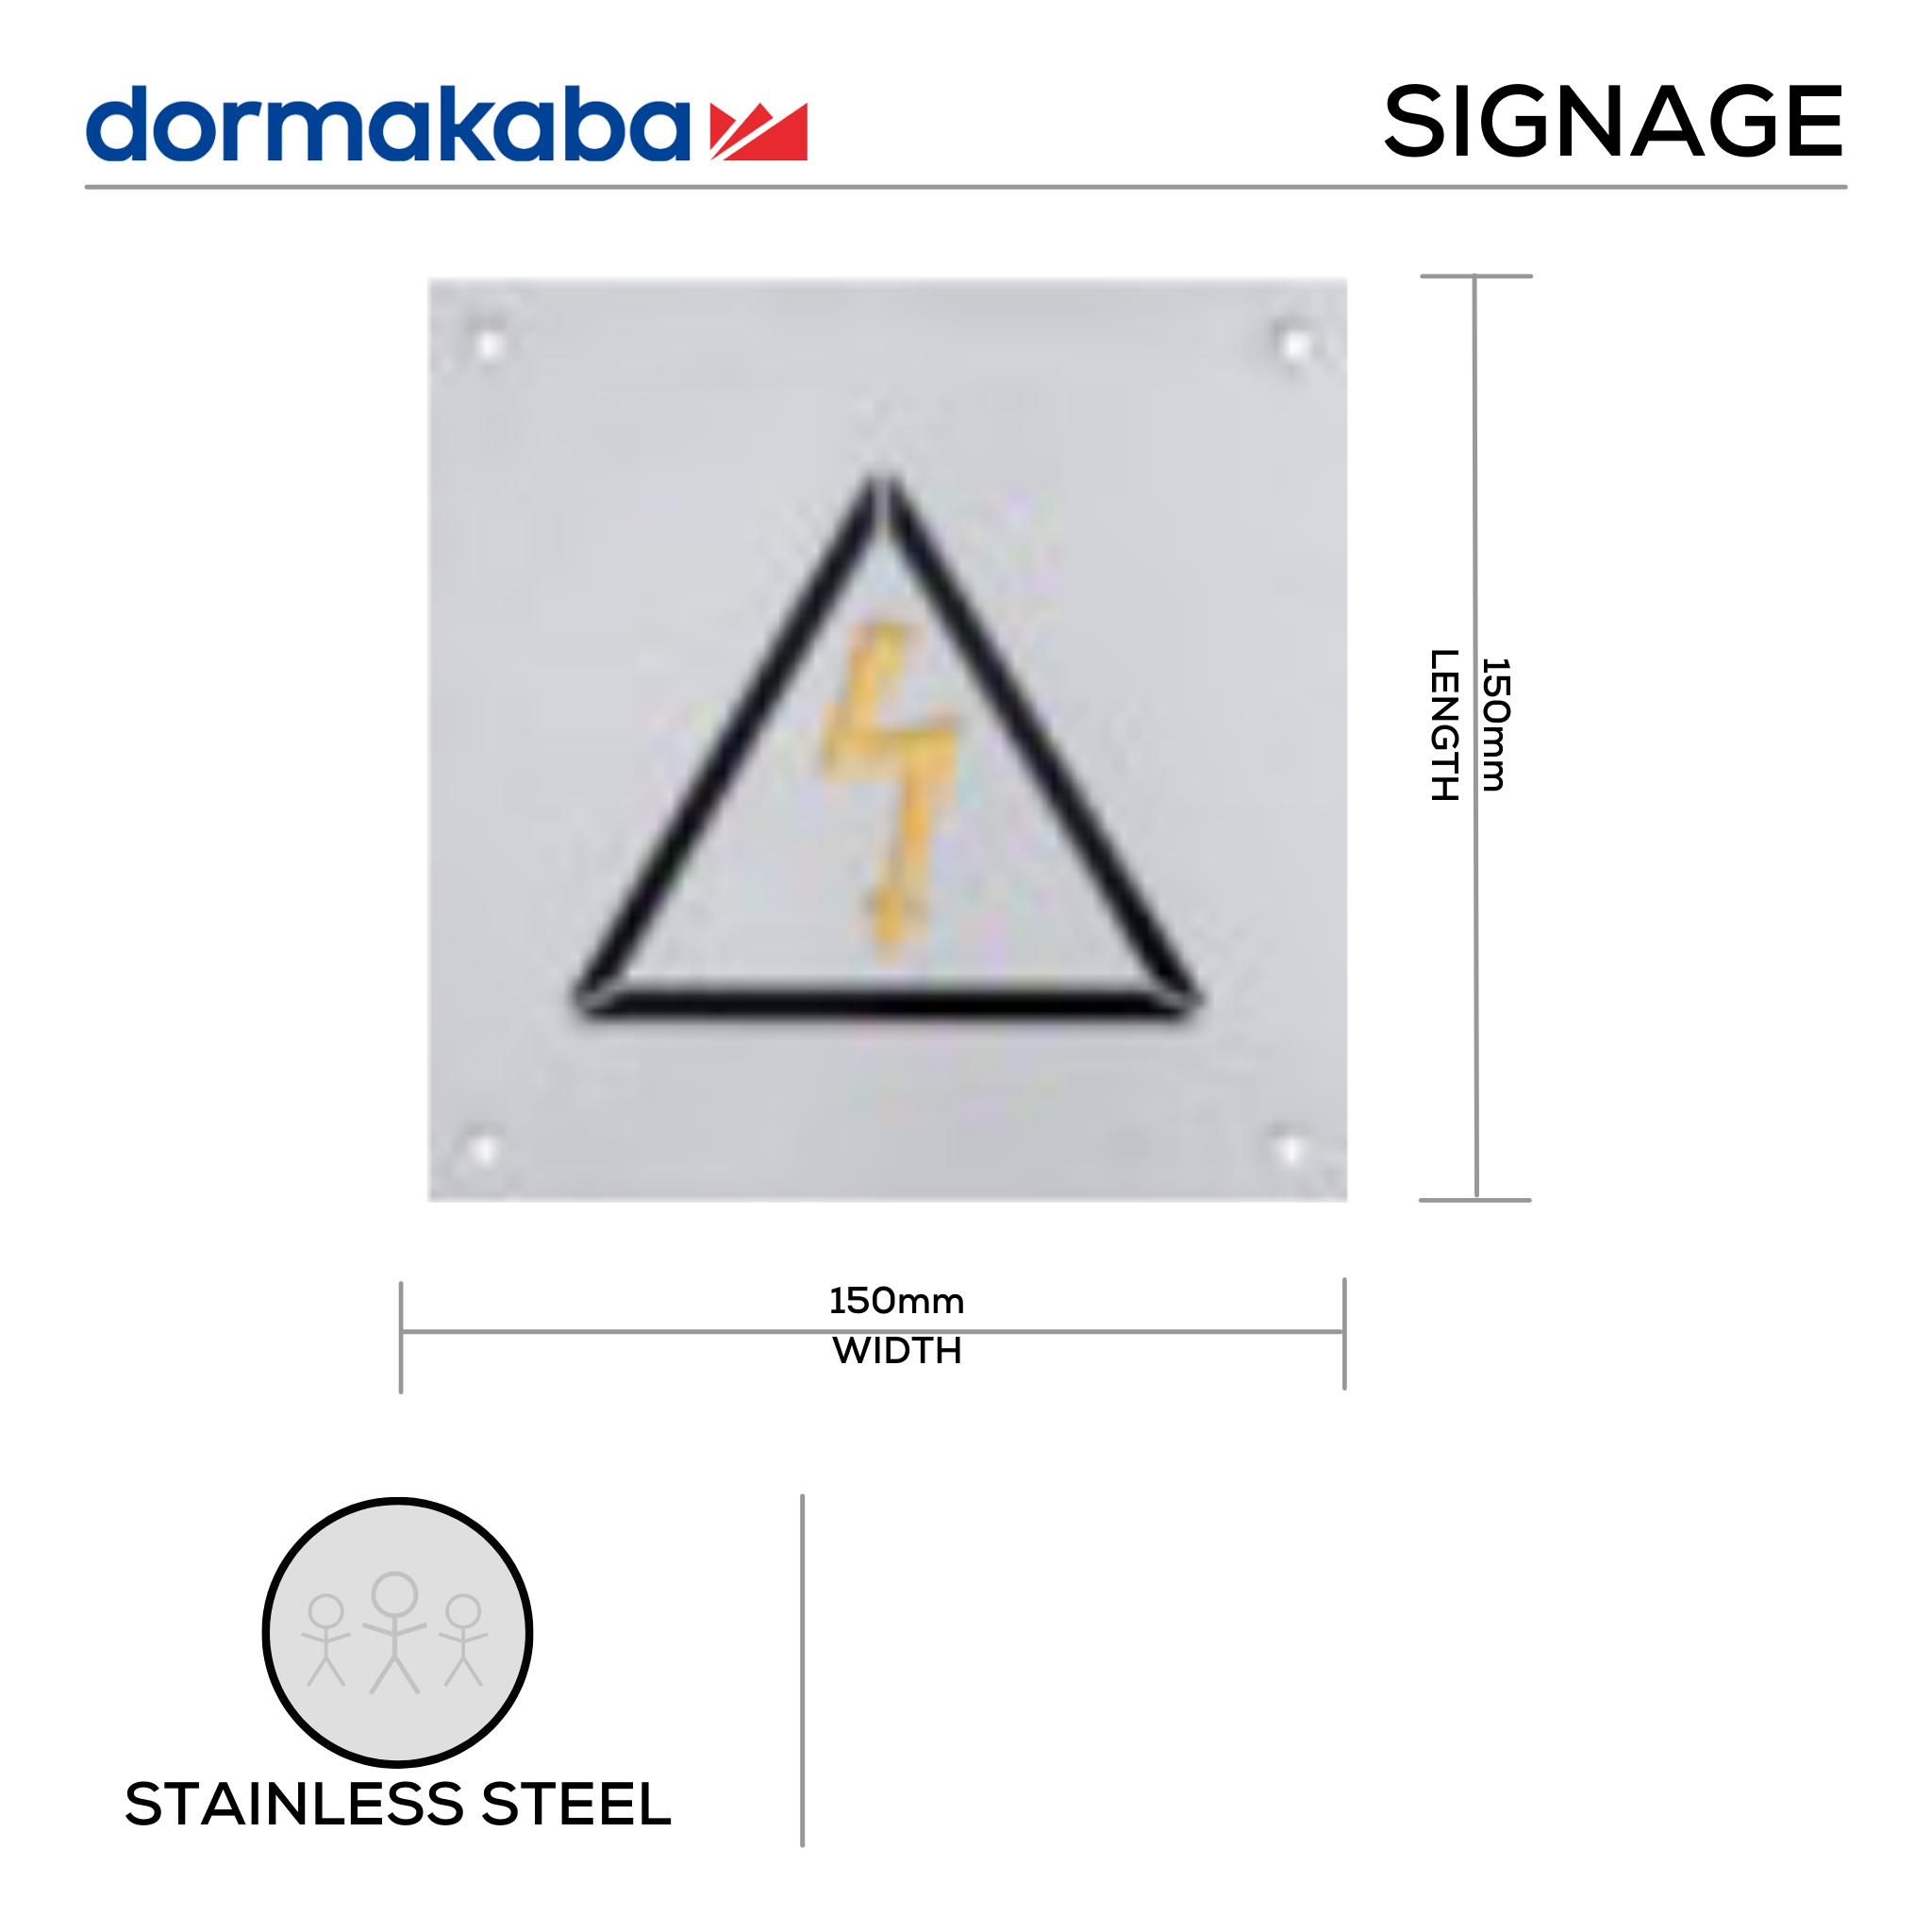 DSS-136, Door Signage, Electrical , 150mm (l), 150mm (w), 1,2mm (t), Stainless Steel, DORMAKABA